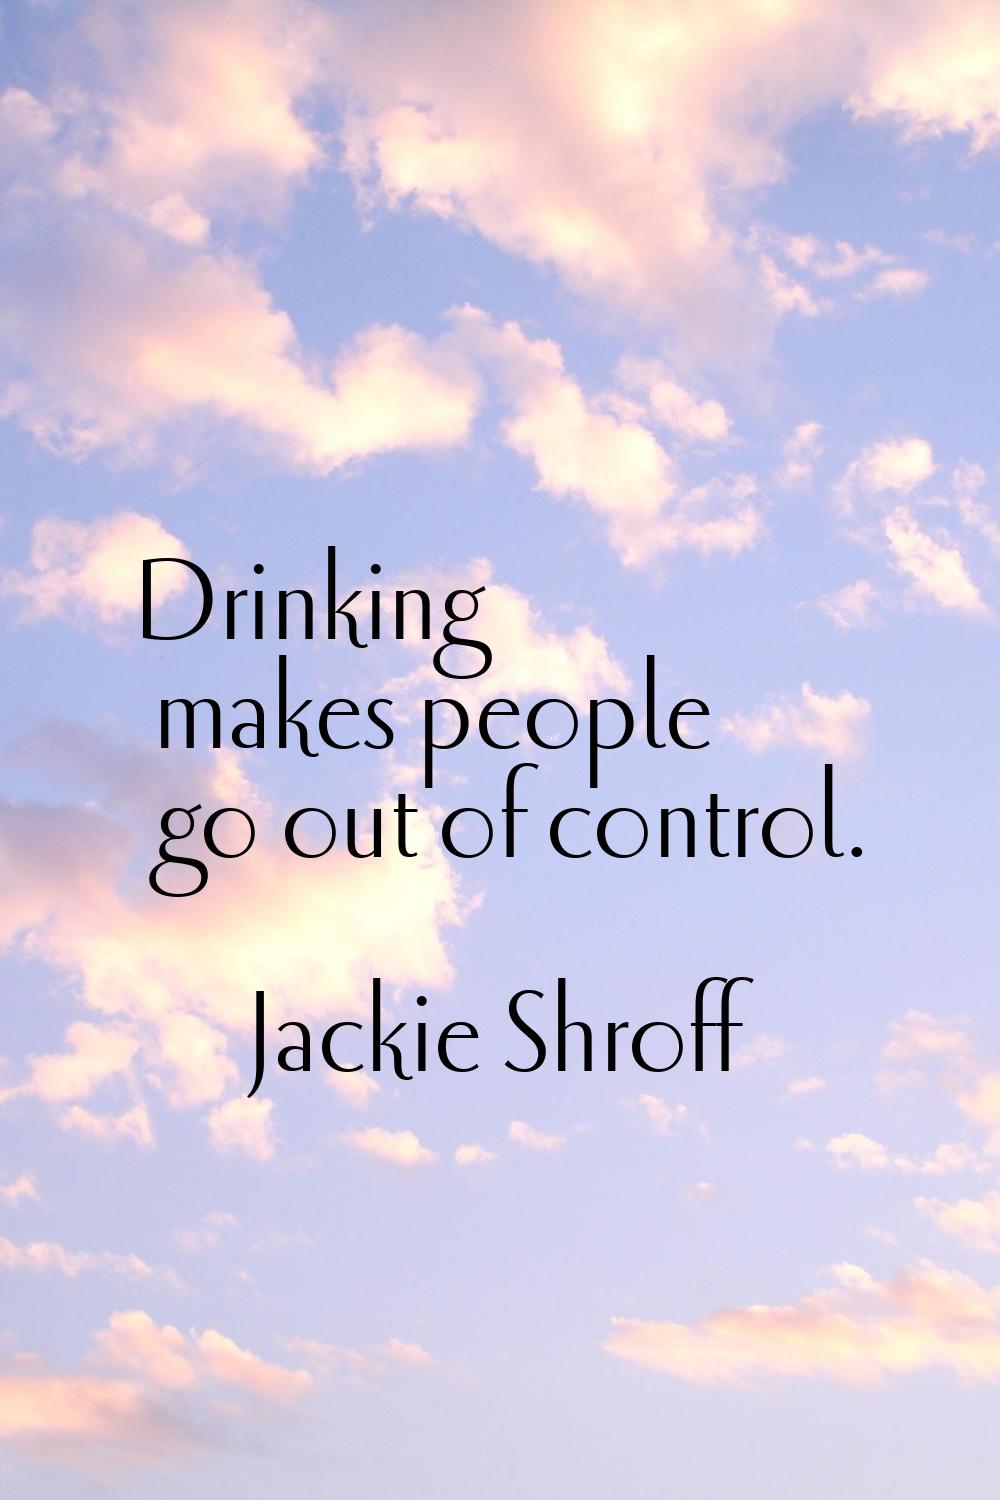 Drinking makes people go out of control.